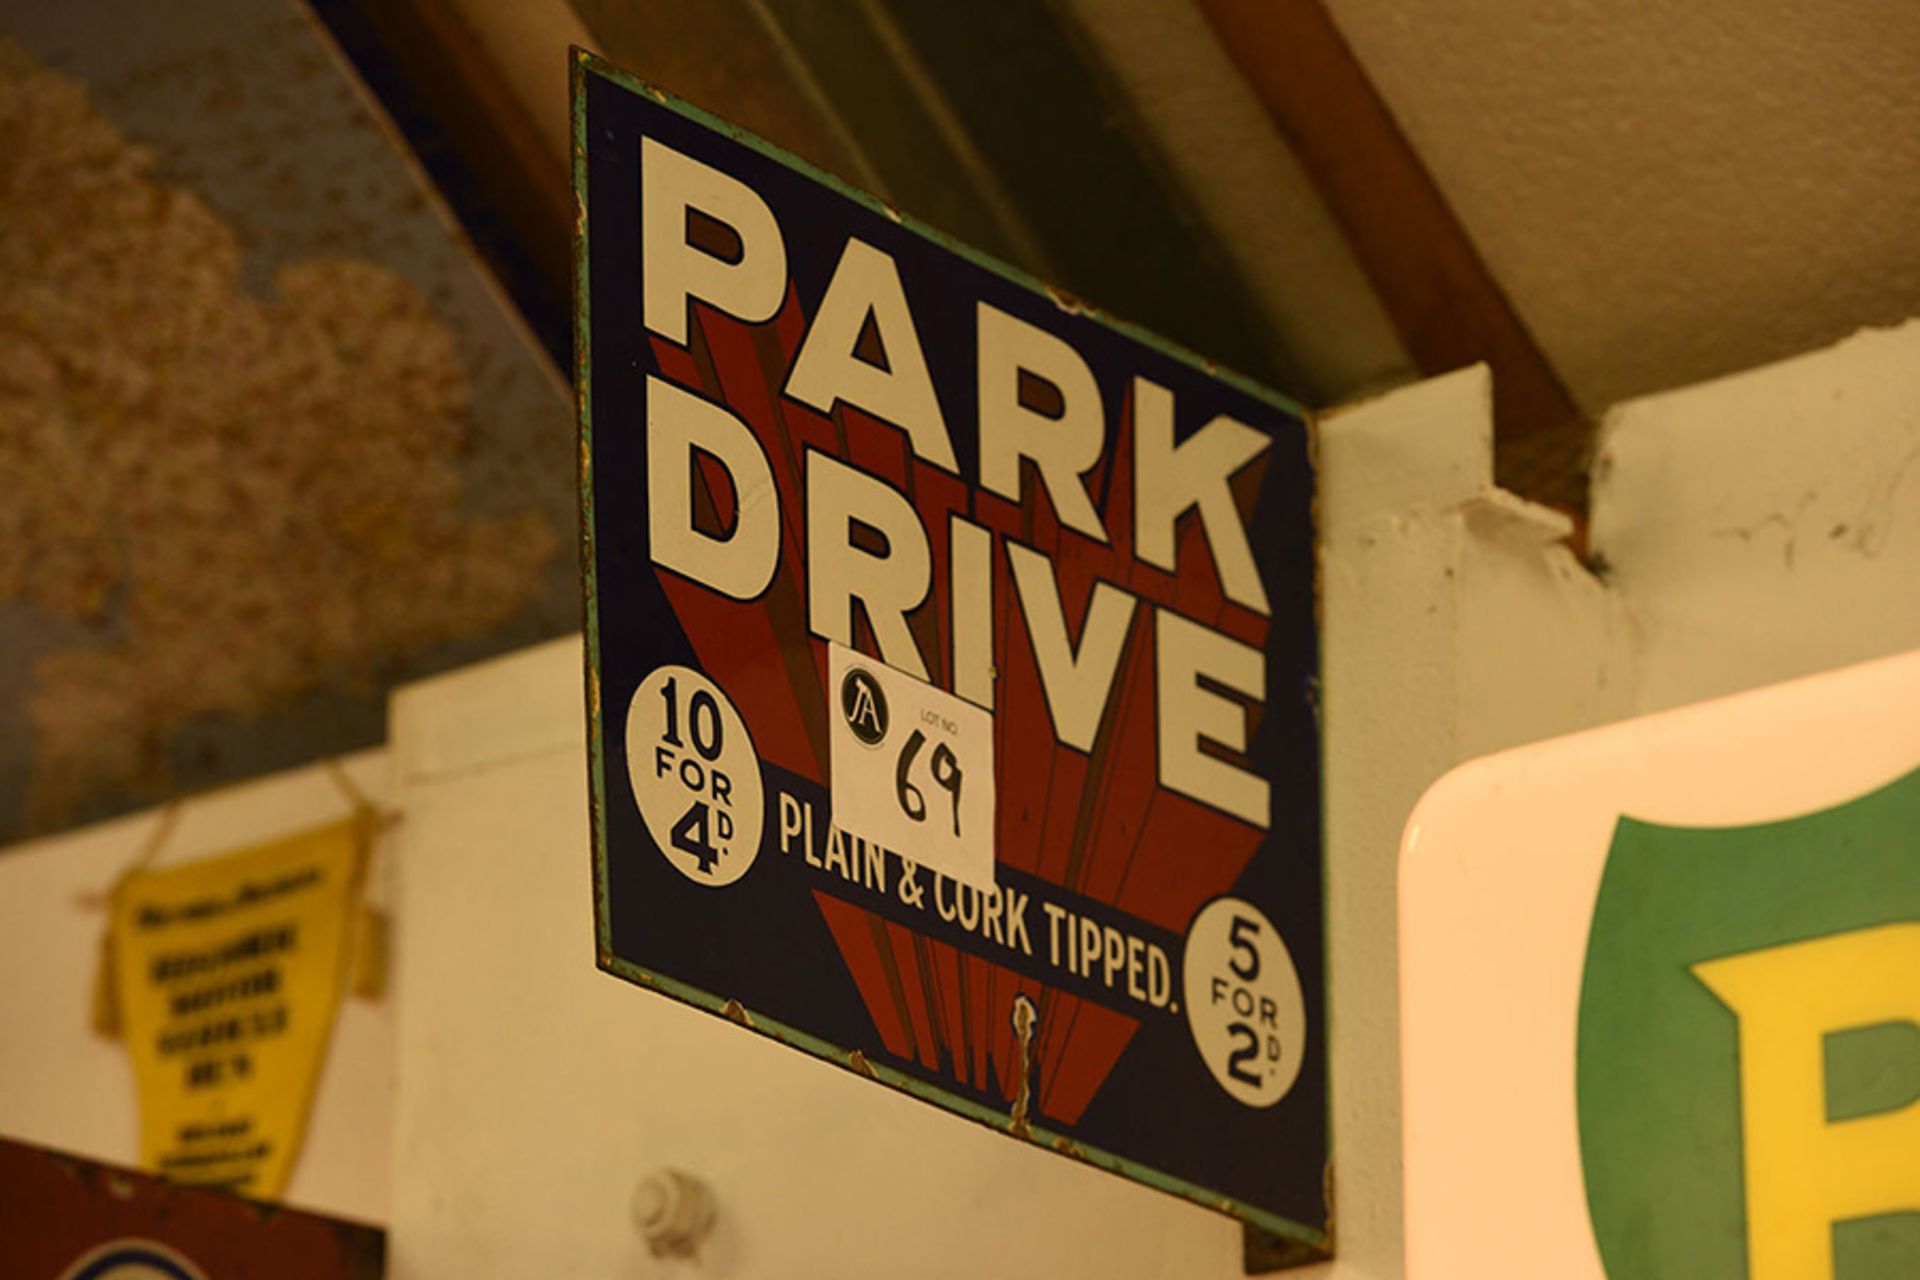 Park Drive double sided enamel sign